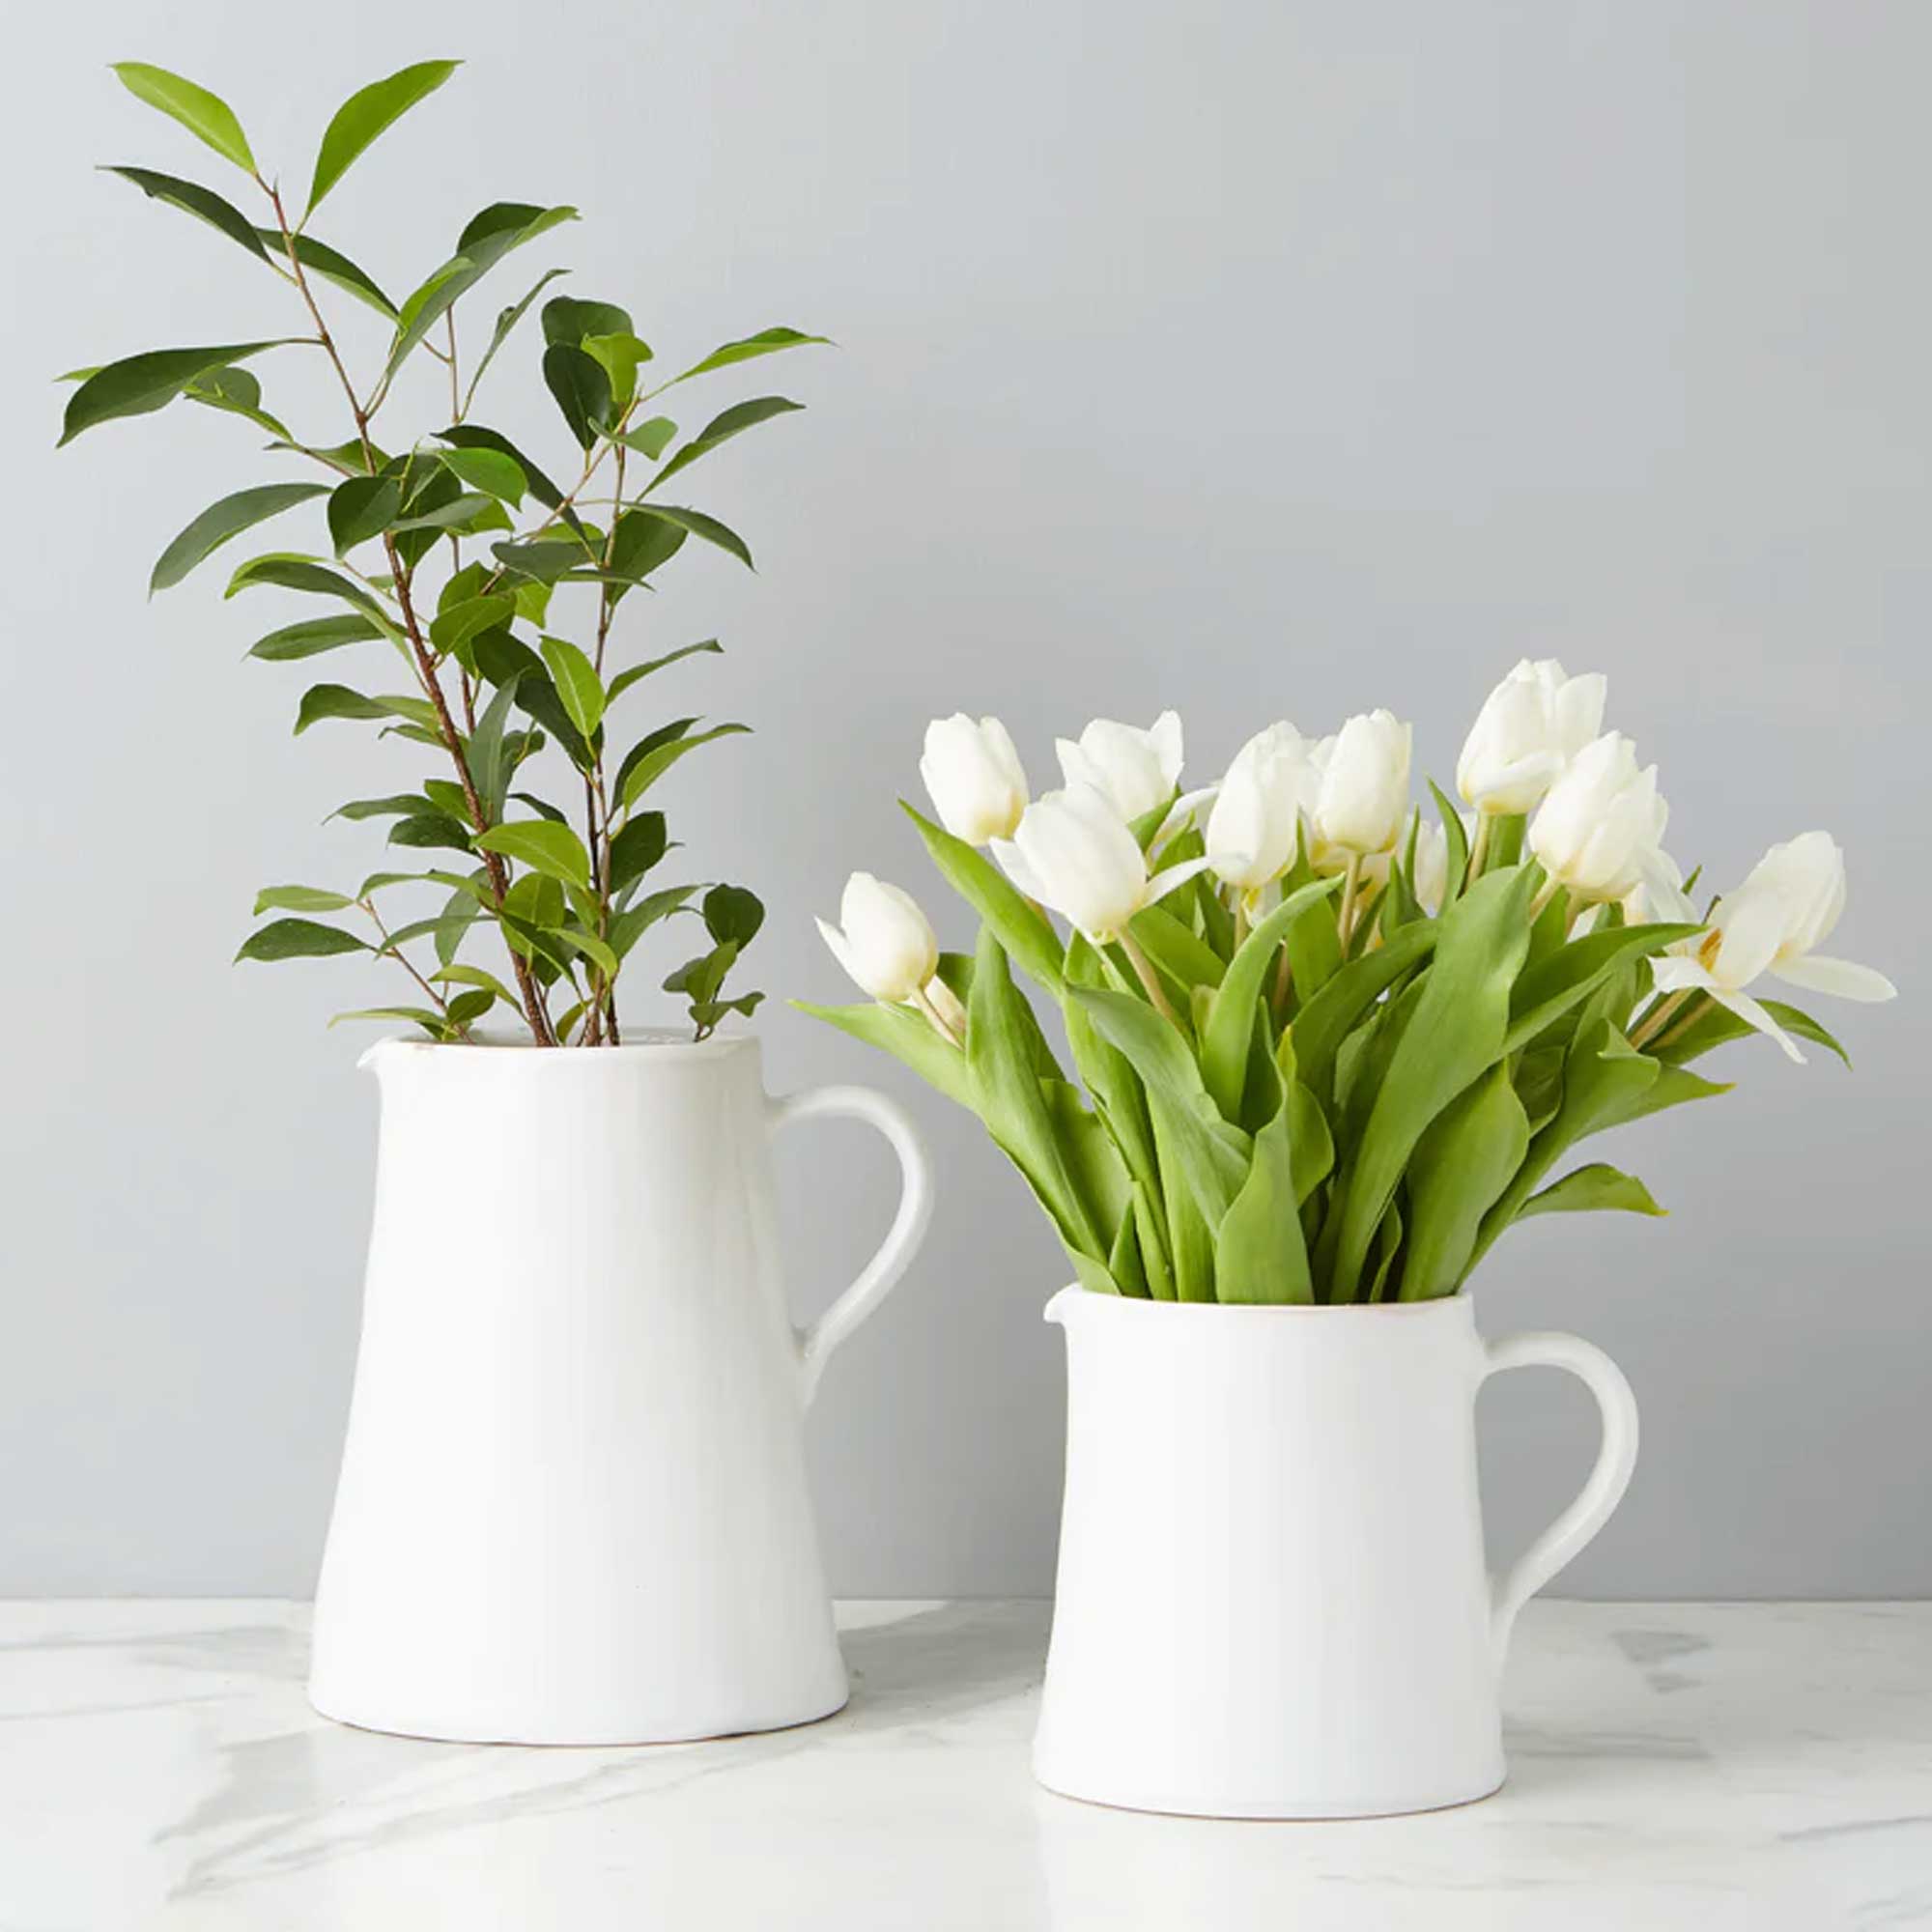 Large and Small White Water Jugs with Flowers